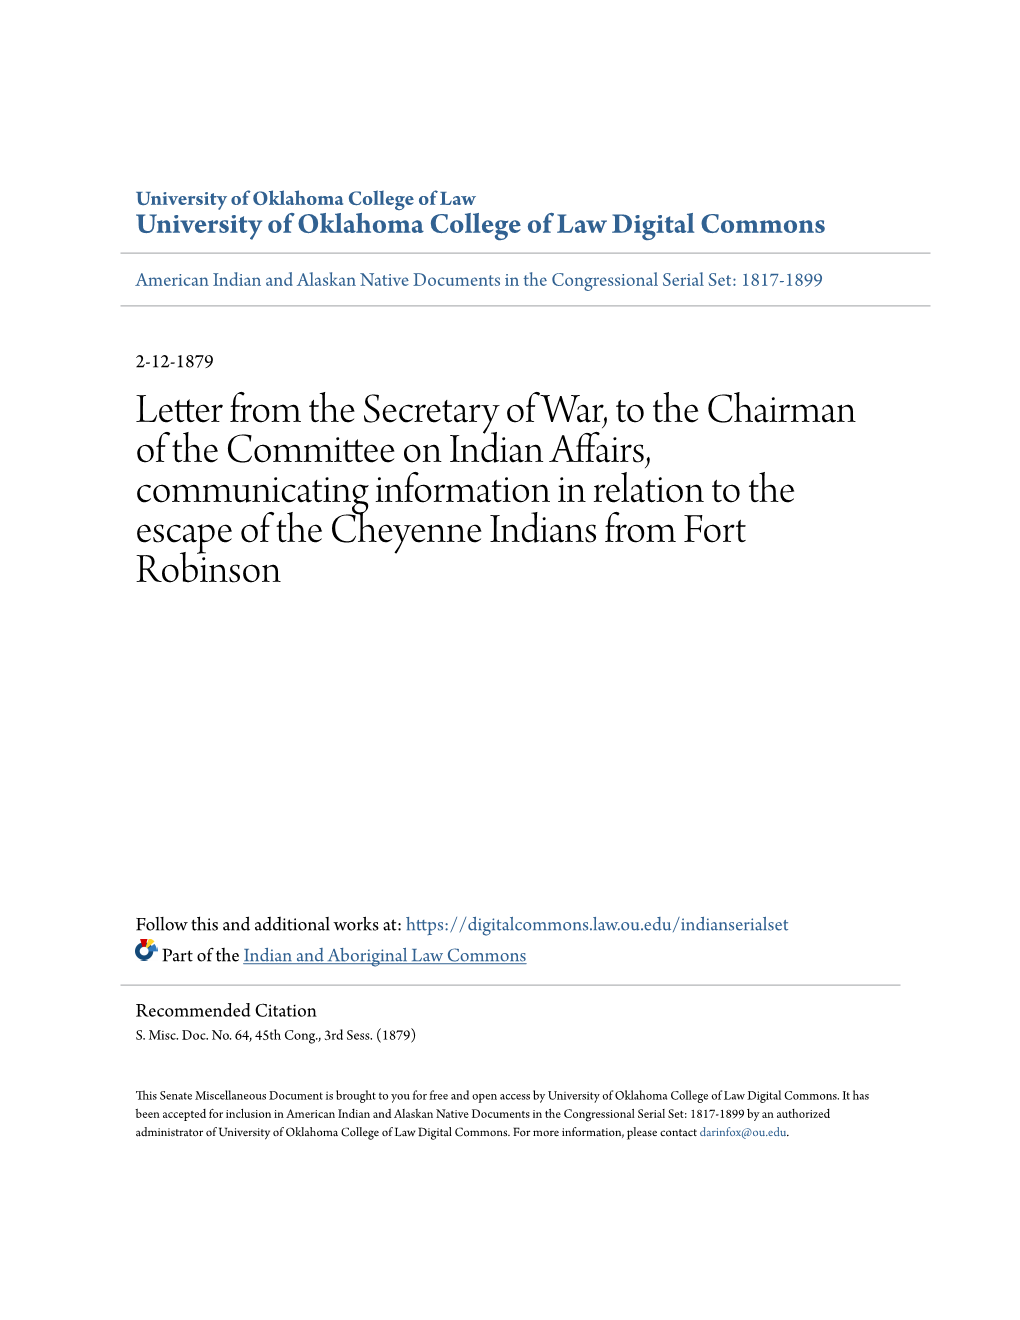 Letter from the Secretary of War, to the Chairman of the Committee On